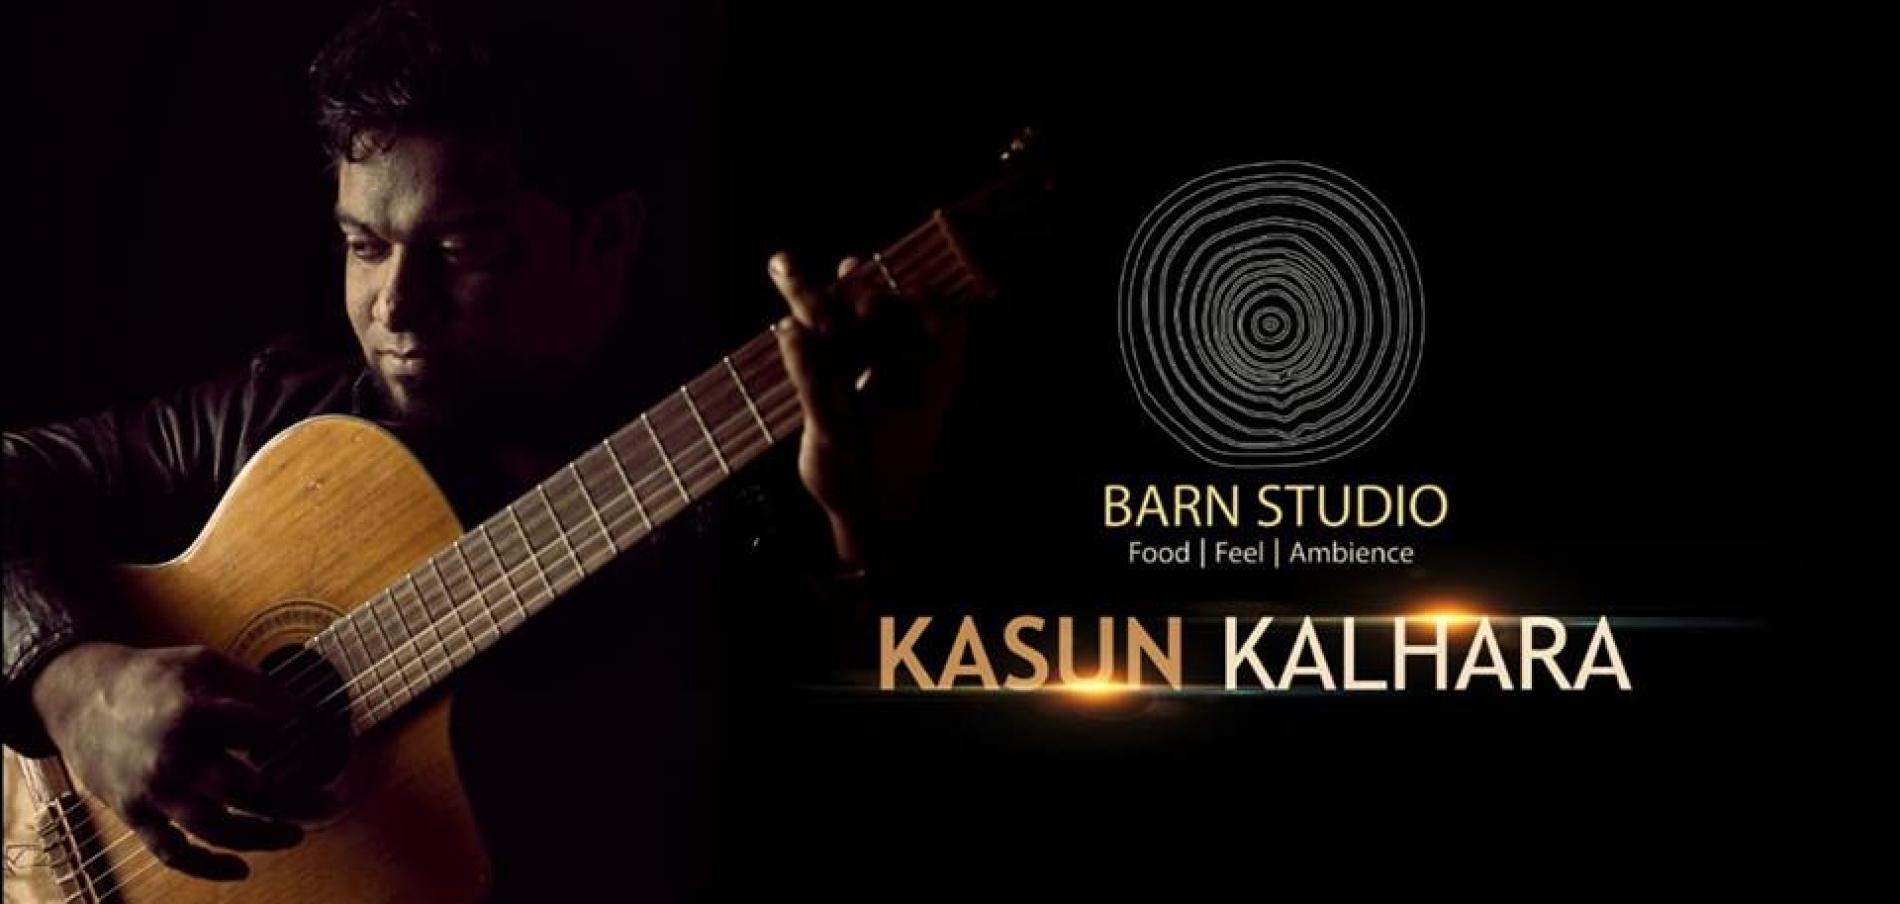 Wine And Dine With Kasun Kalhara